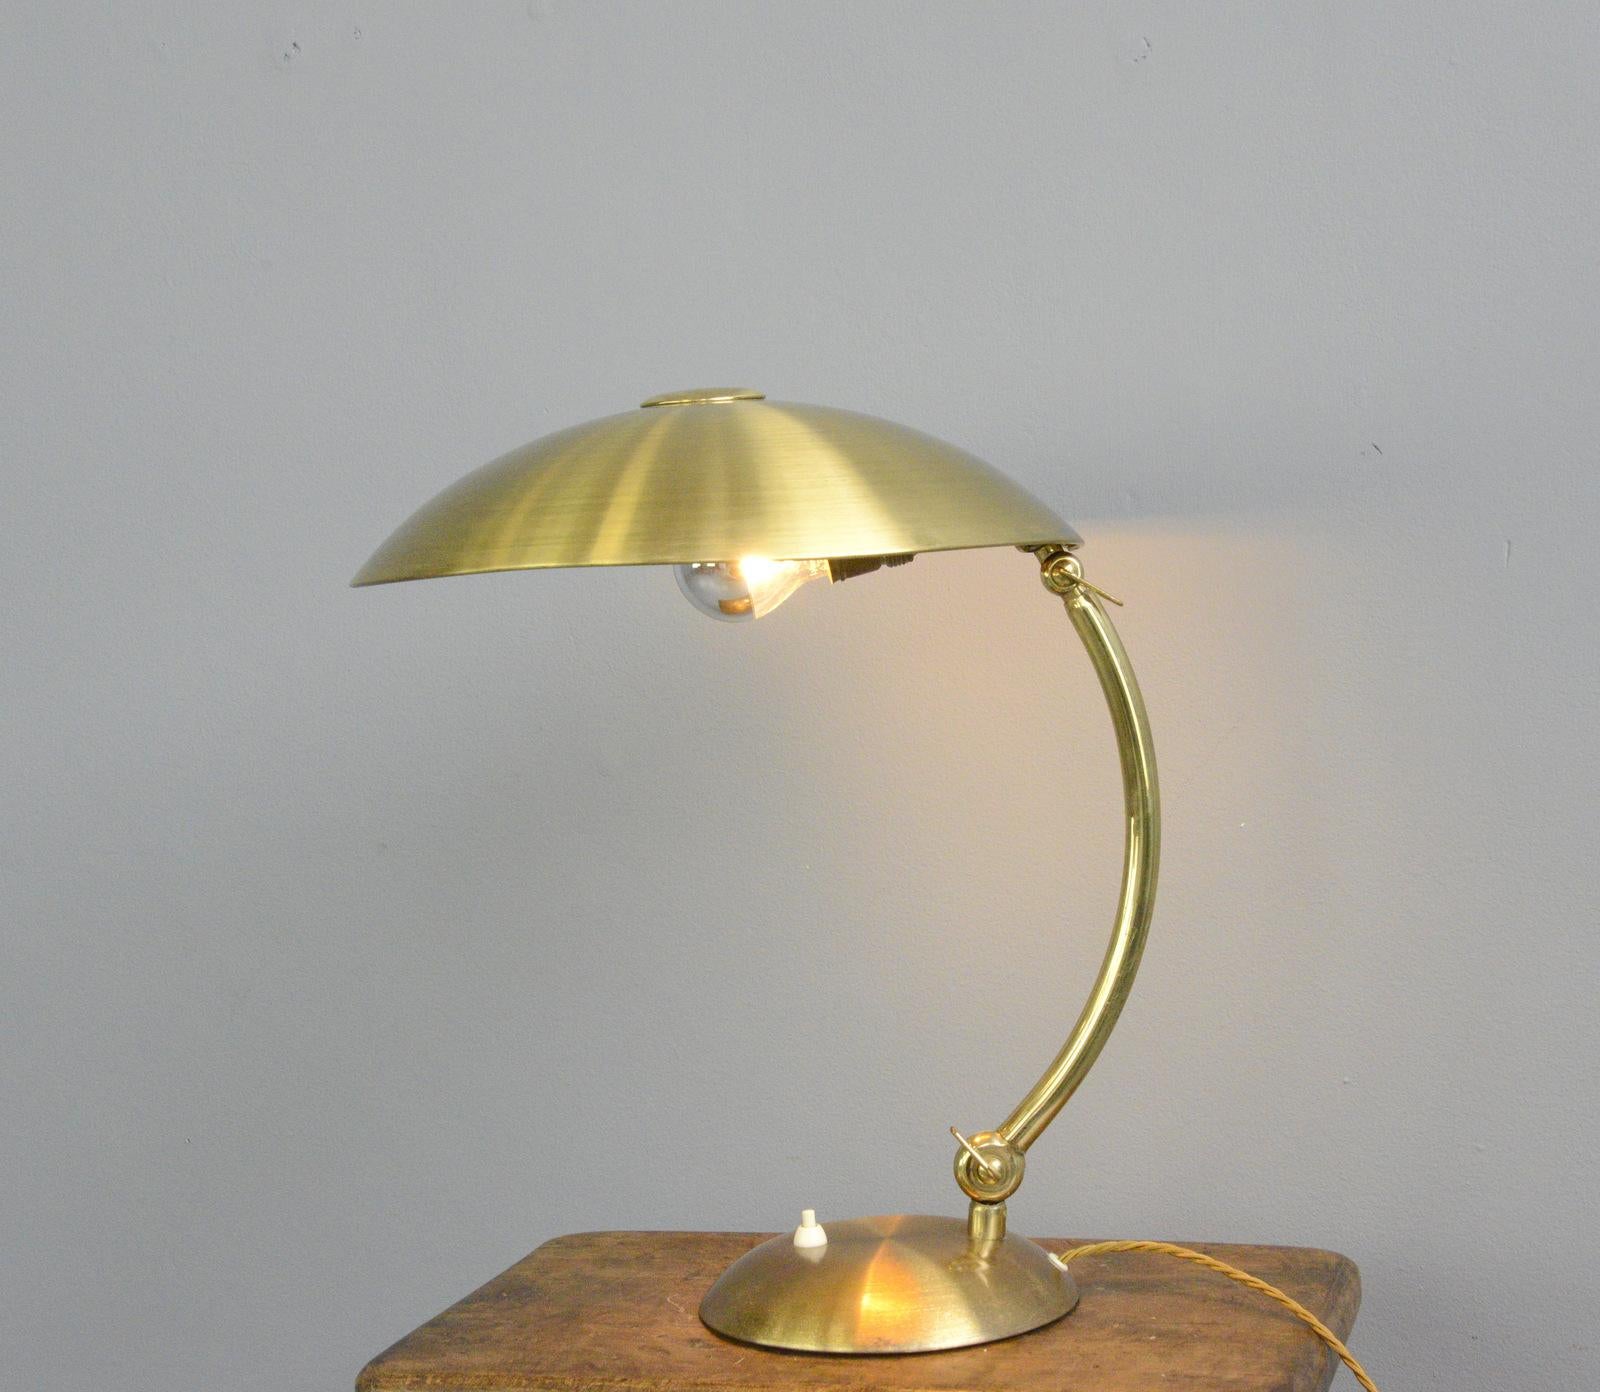 Bauhaus brass table lamp by Hillebrand, circa 1930s

- Fully brass
- Dual bulb holders
- Takes E27 fitting bulbs
- On/Off switch on the base
- Made by Hillebrand 
- German, 1930s
- Measures: 44cm tall x 36cm wide x 42cm